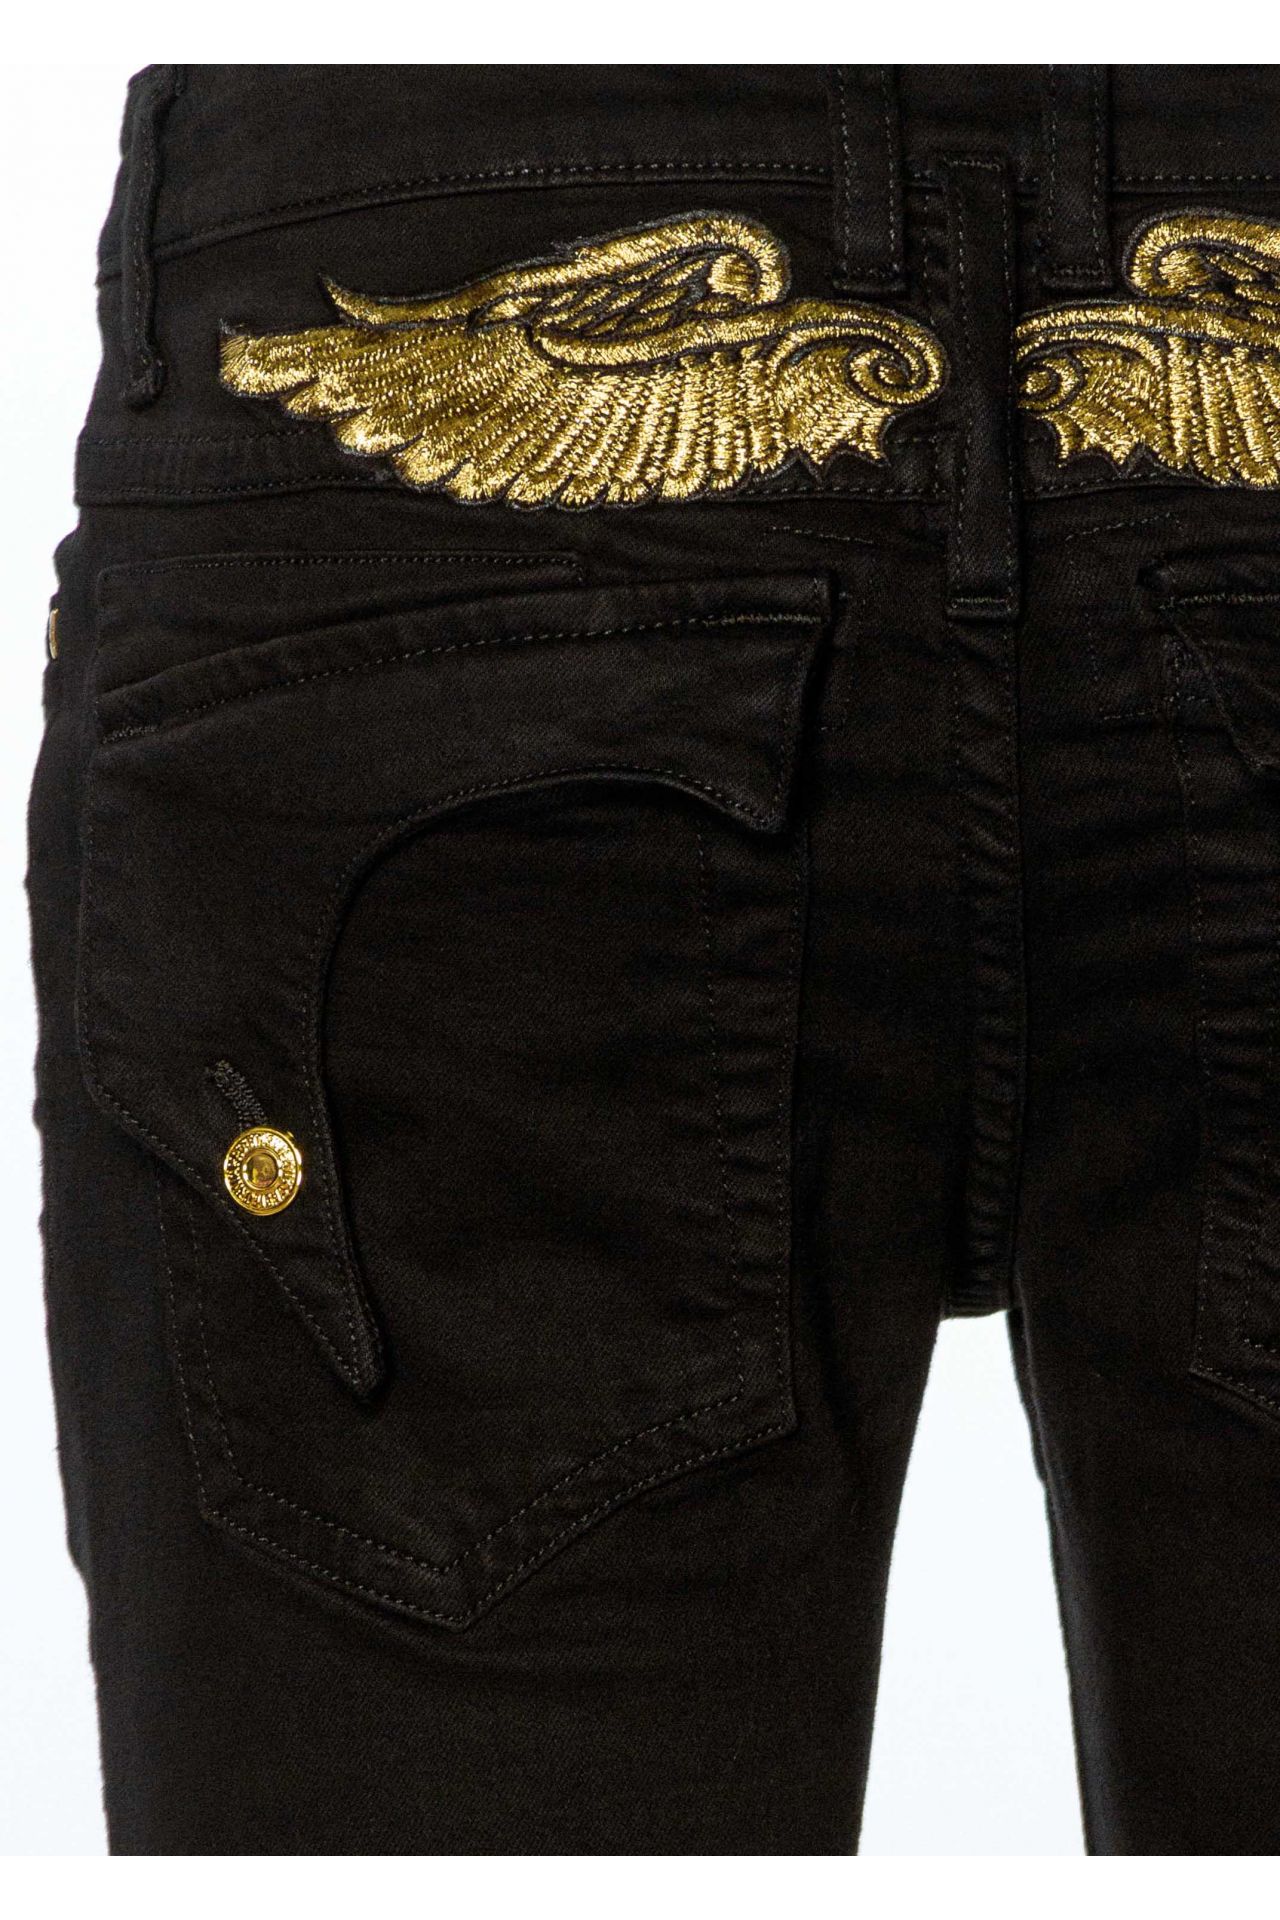 KILLER FLAP MENS SKINNY JEANS IN BLACK WITH GOLD WINGS